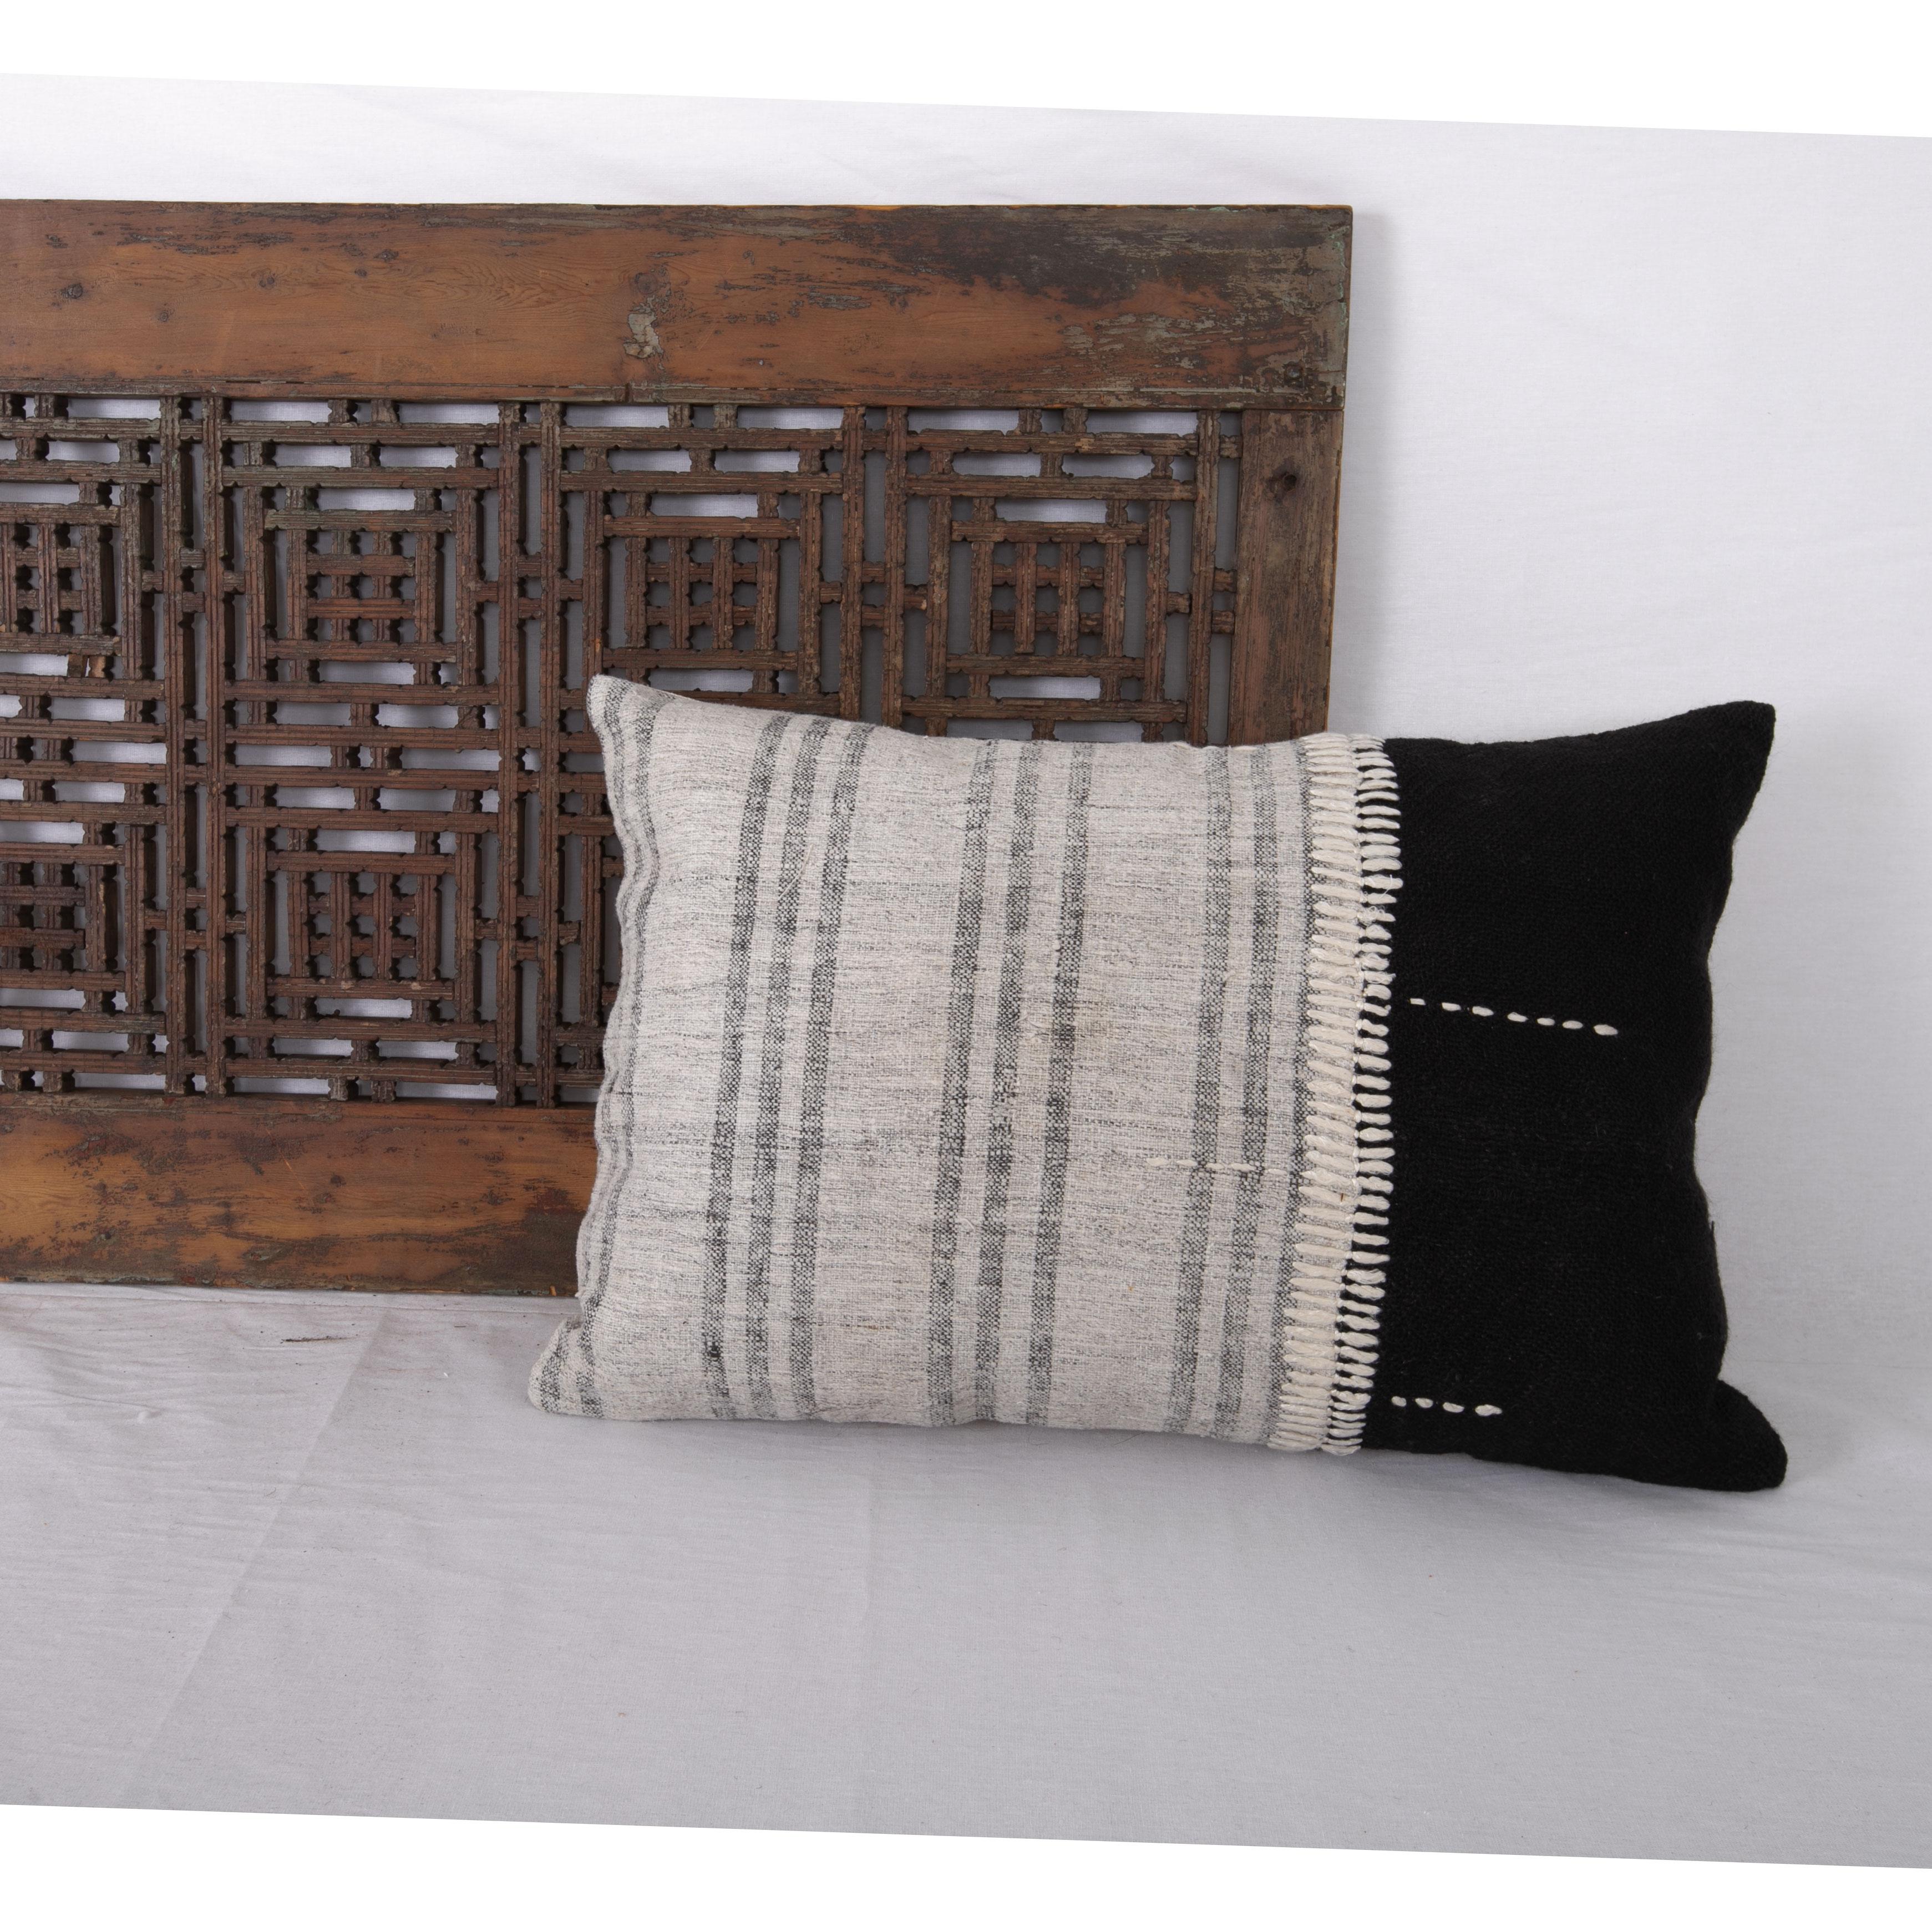 Wool Pillow Case Made from Anatolian Vintage Textiles For Sale